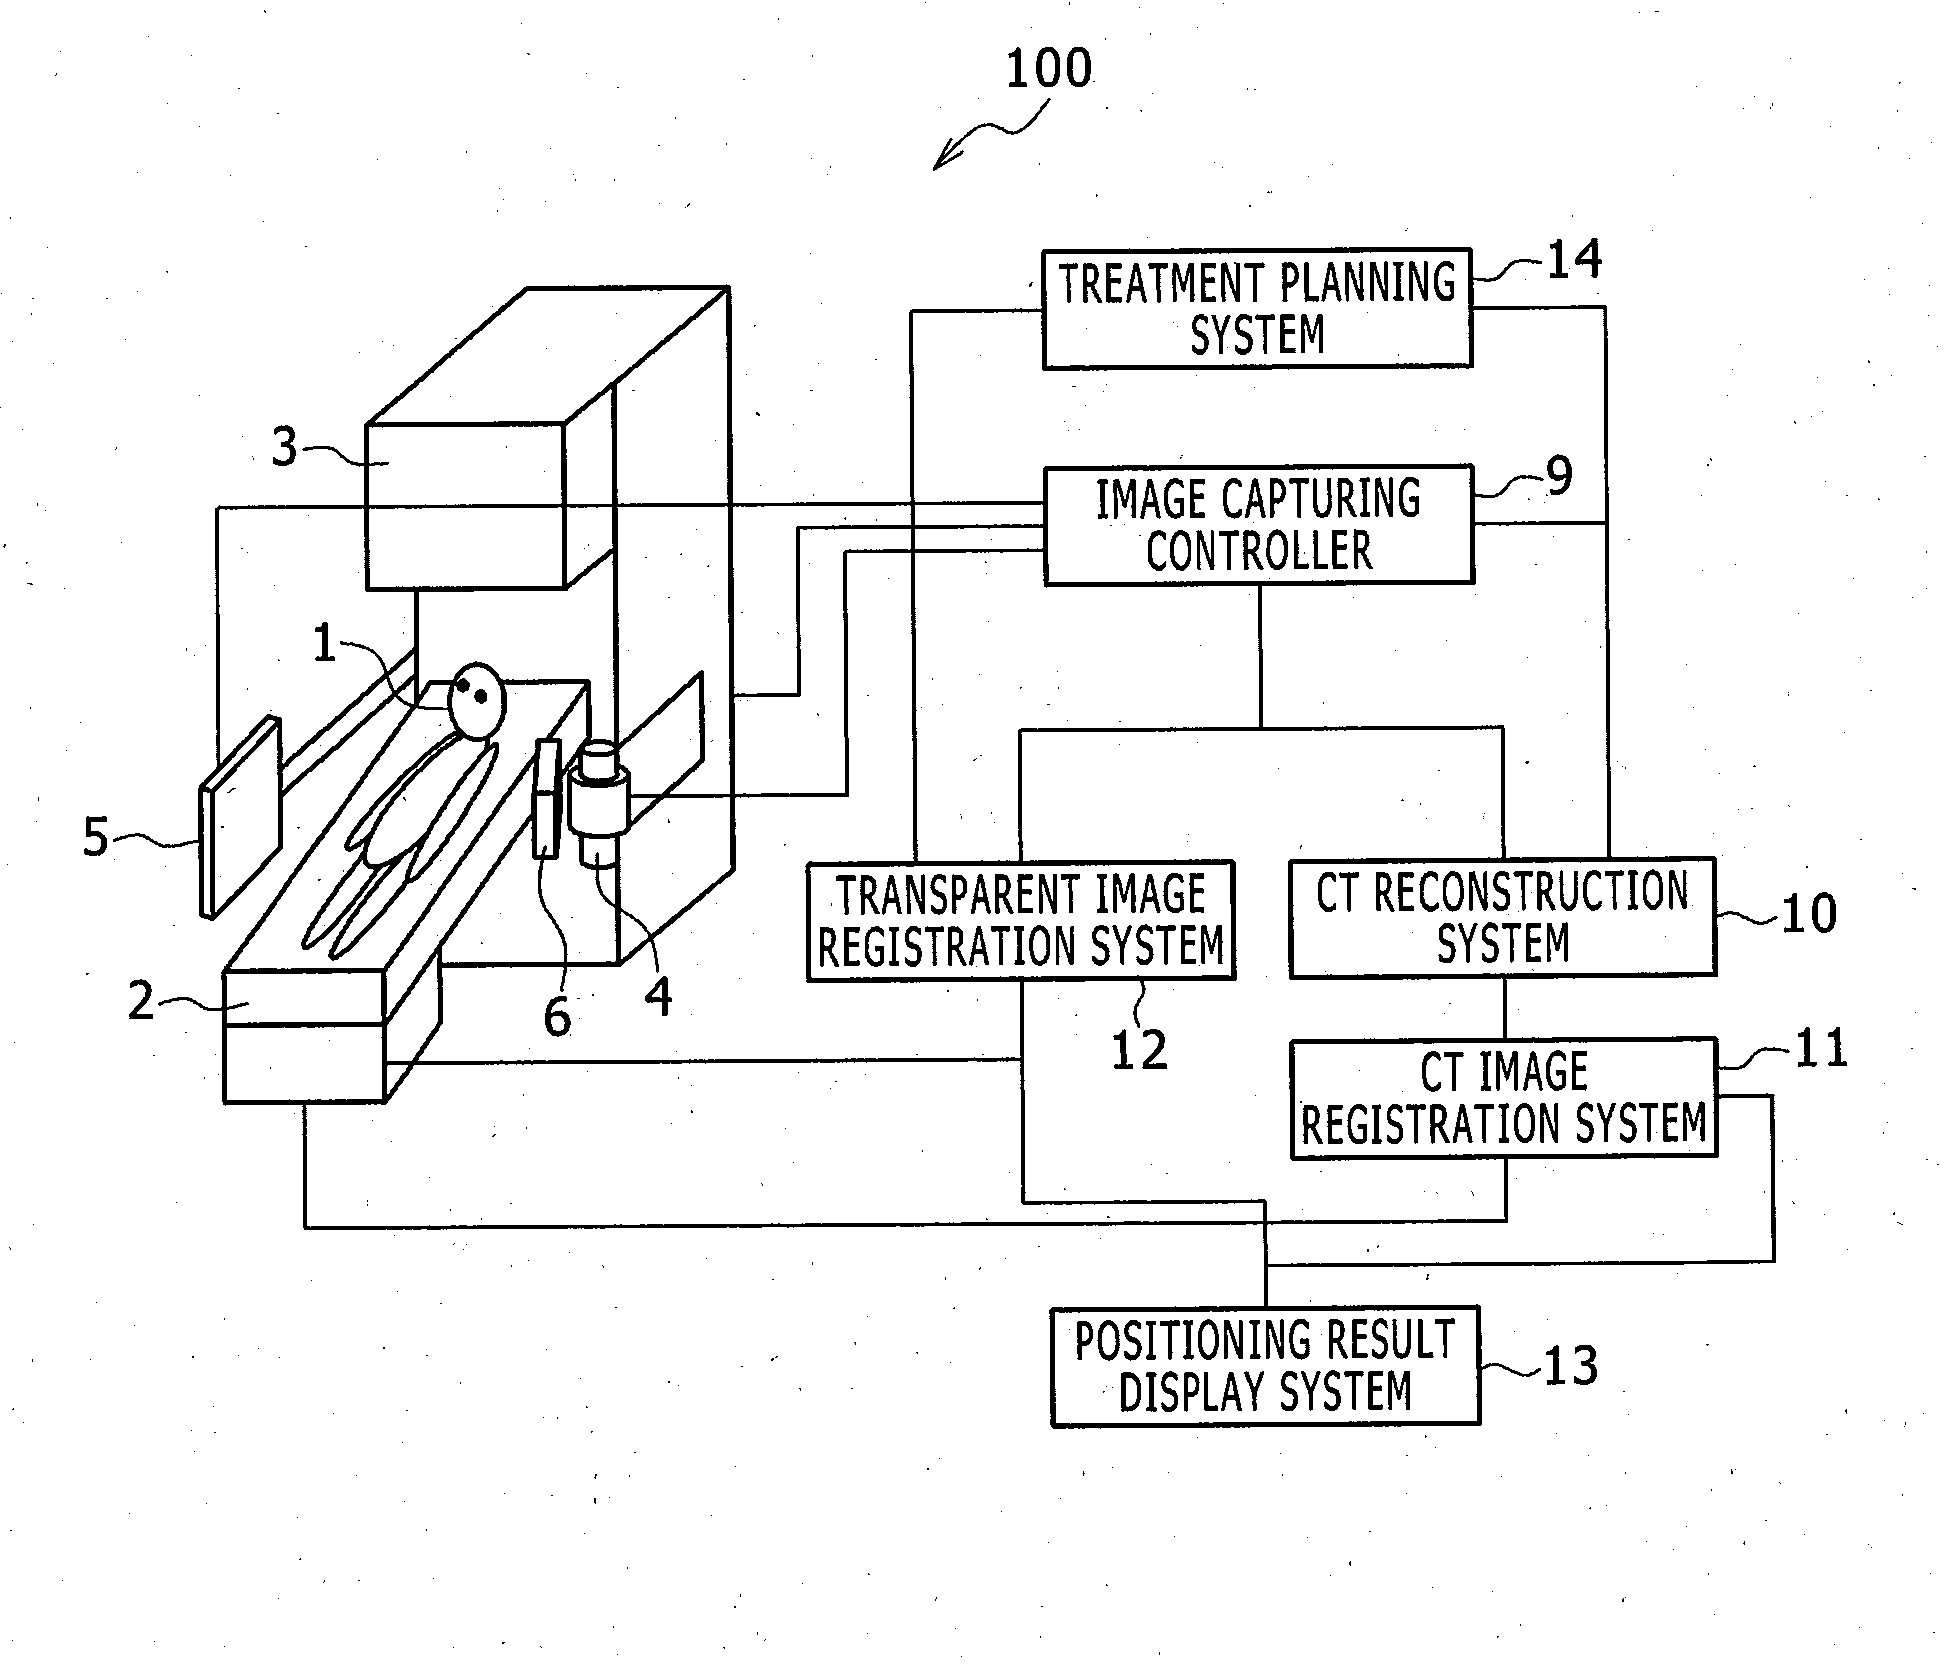 Bed positioning system for radiation therapy